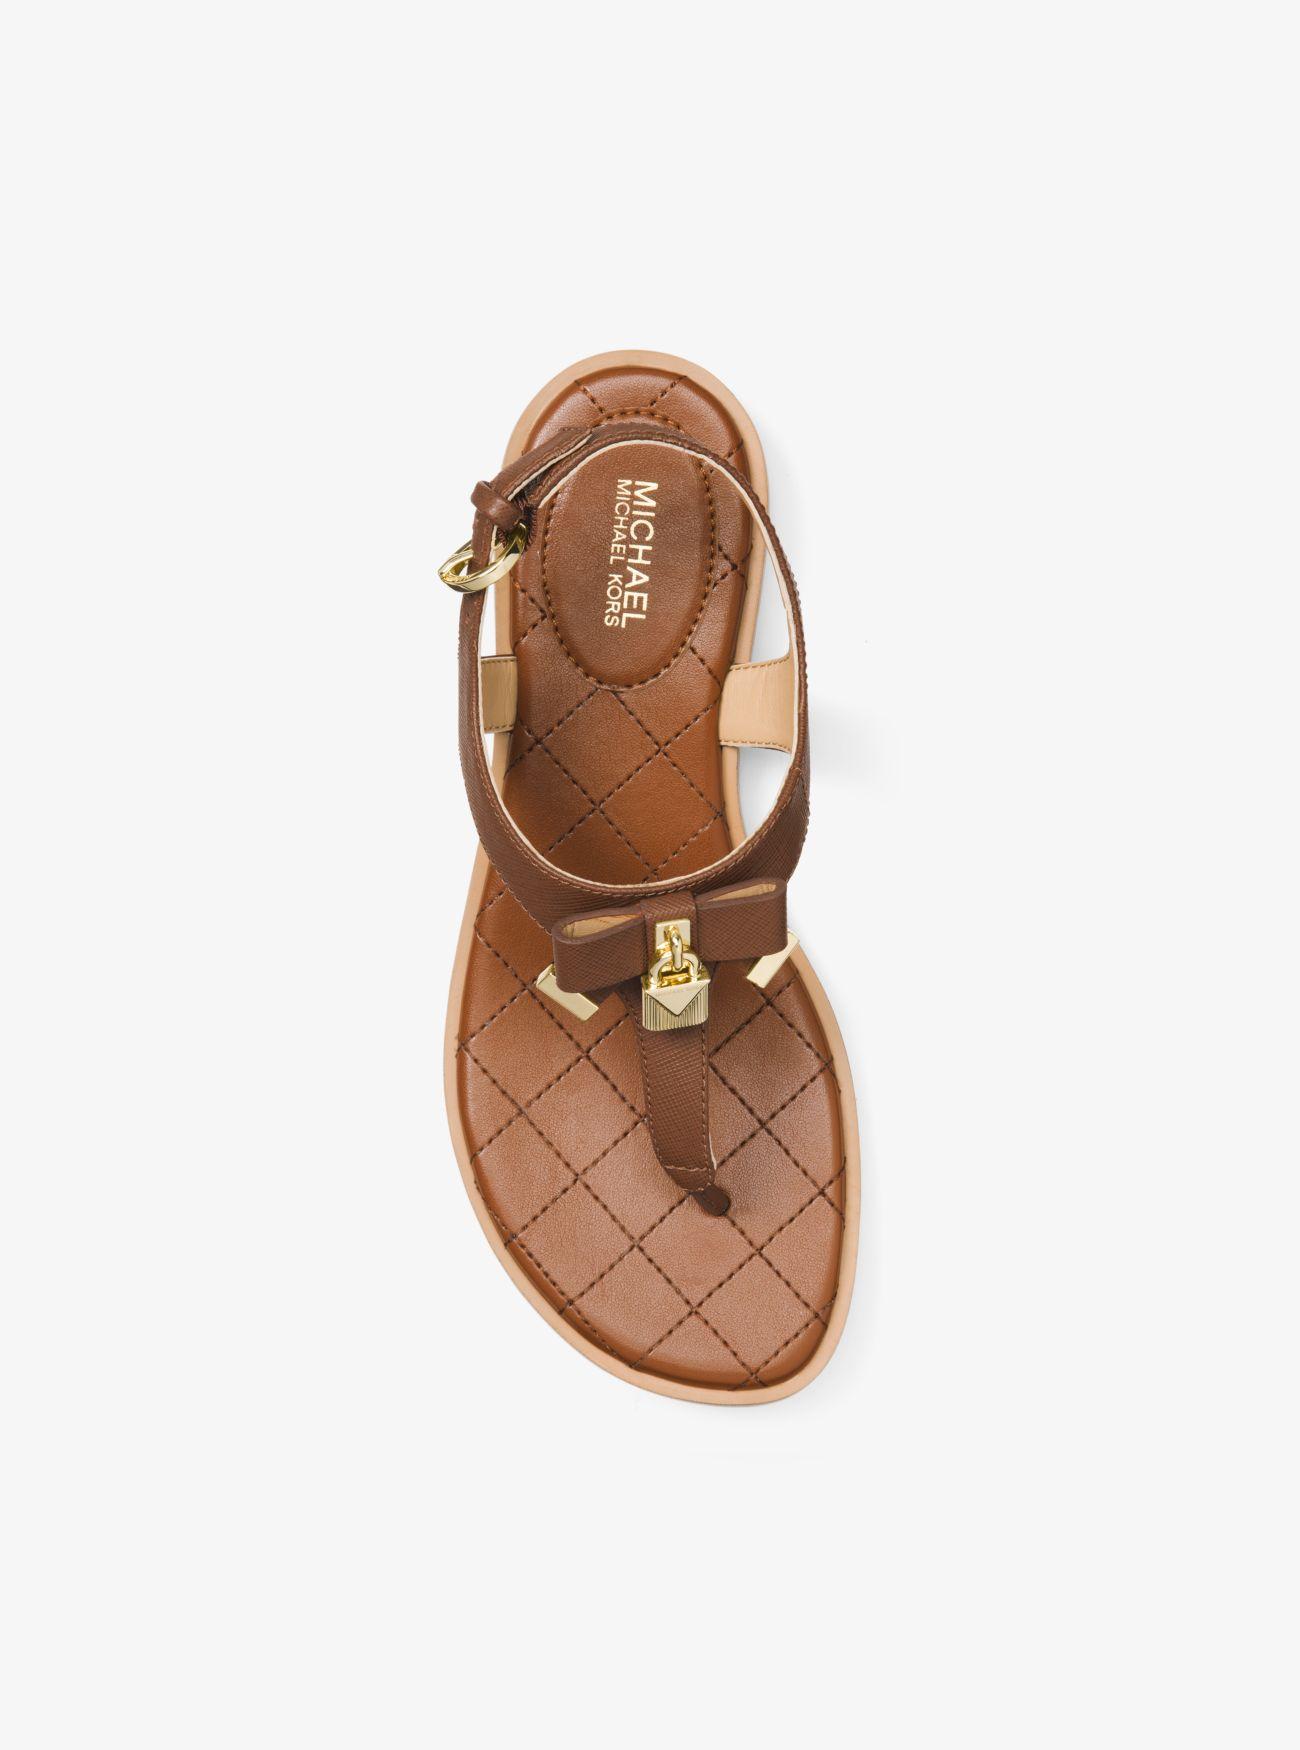 michael kors brown leather sandals